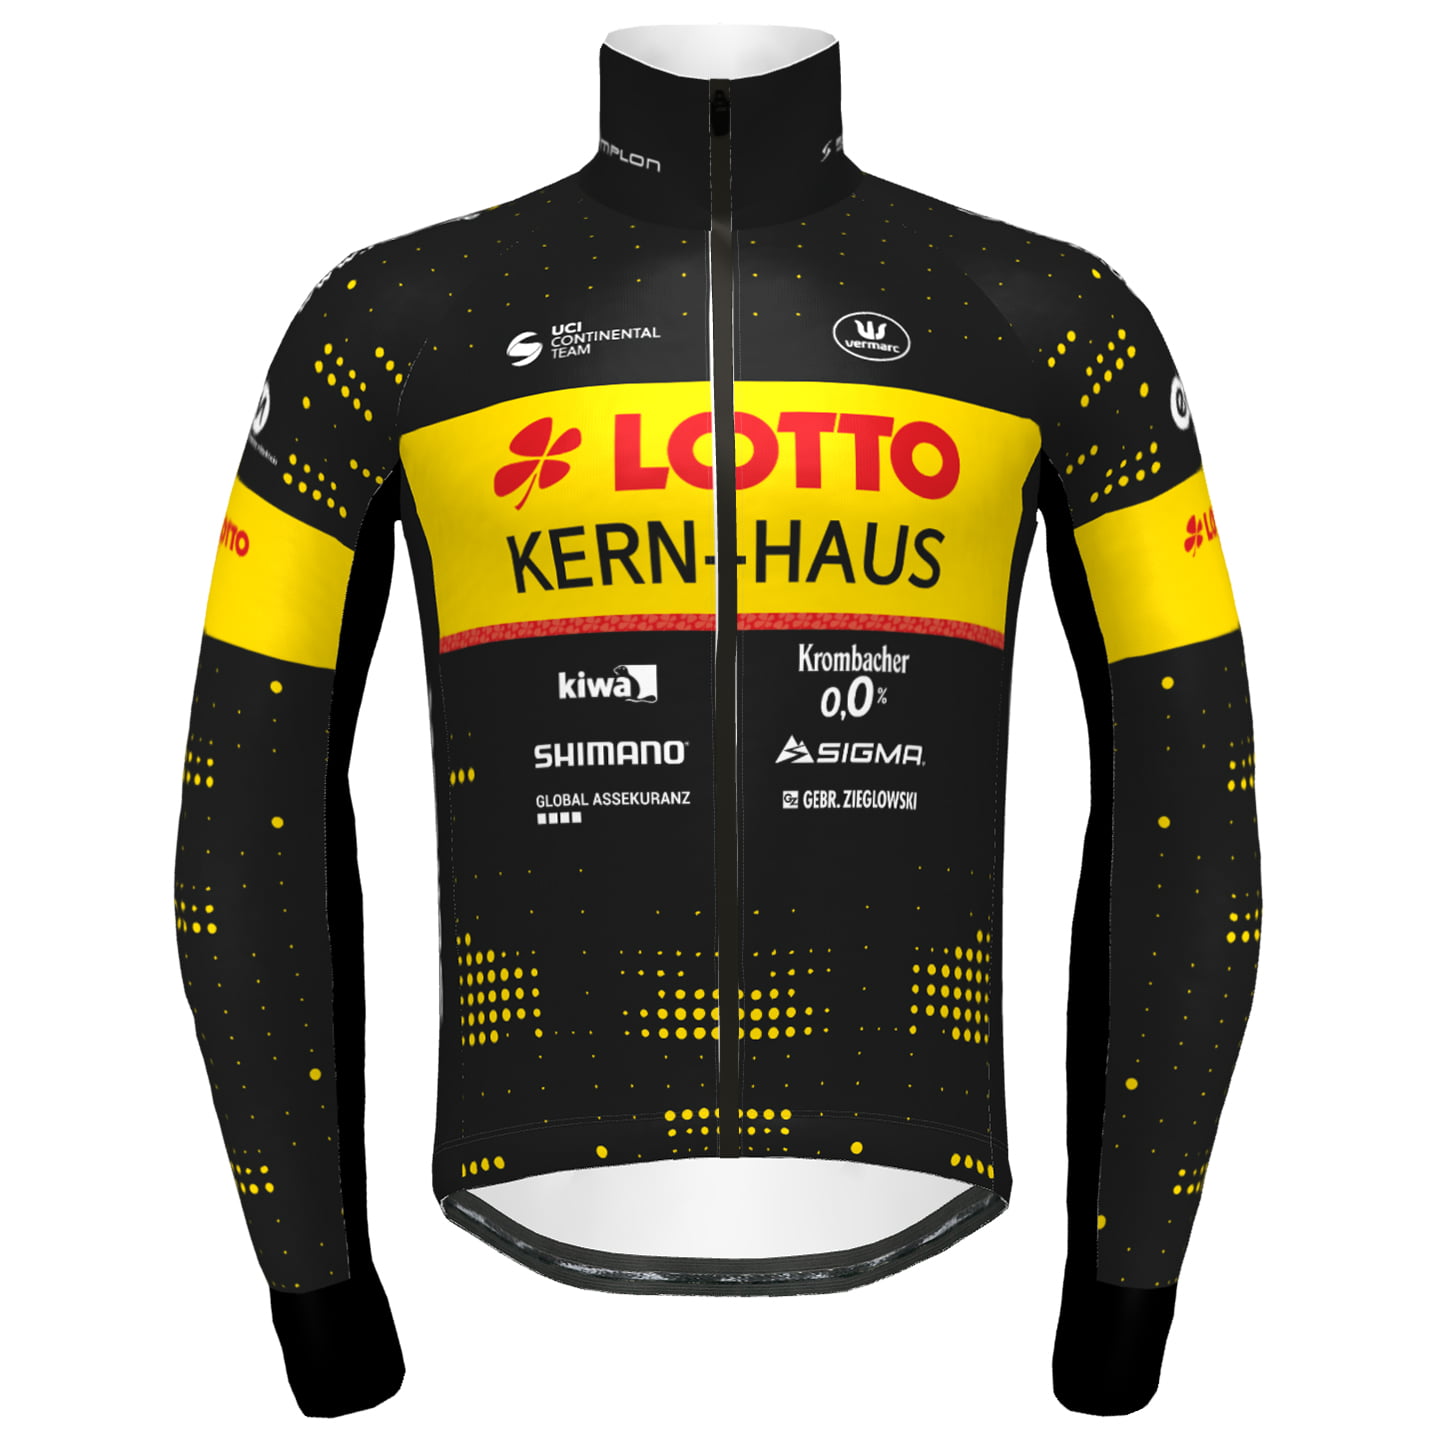 TEAM LOTTO KERN HAUS Winter Jacket 2022 Thermal Jacket, for men, size M, Winter jacket, Cycle clothing